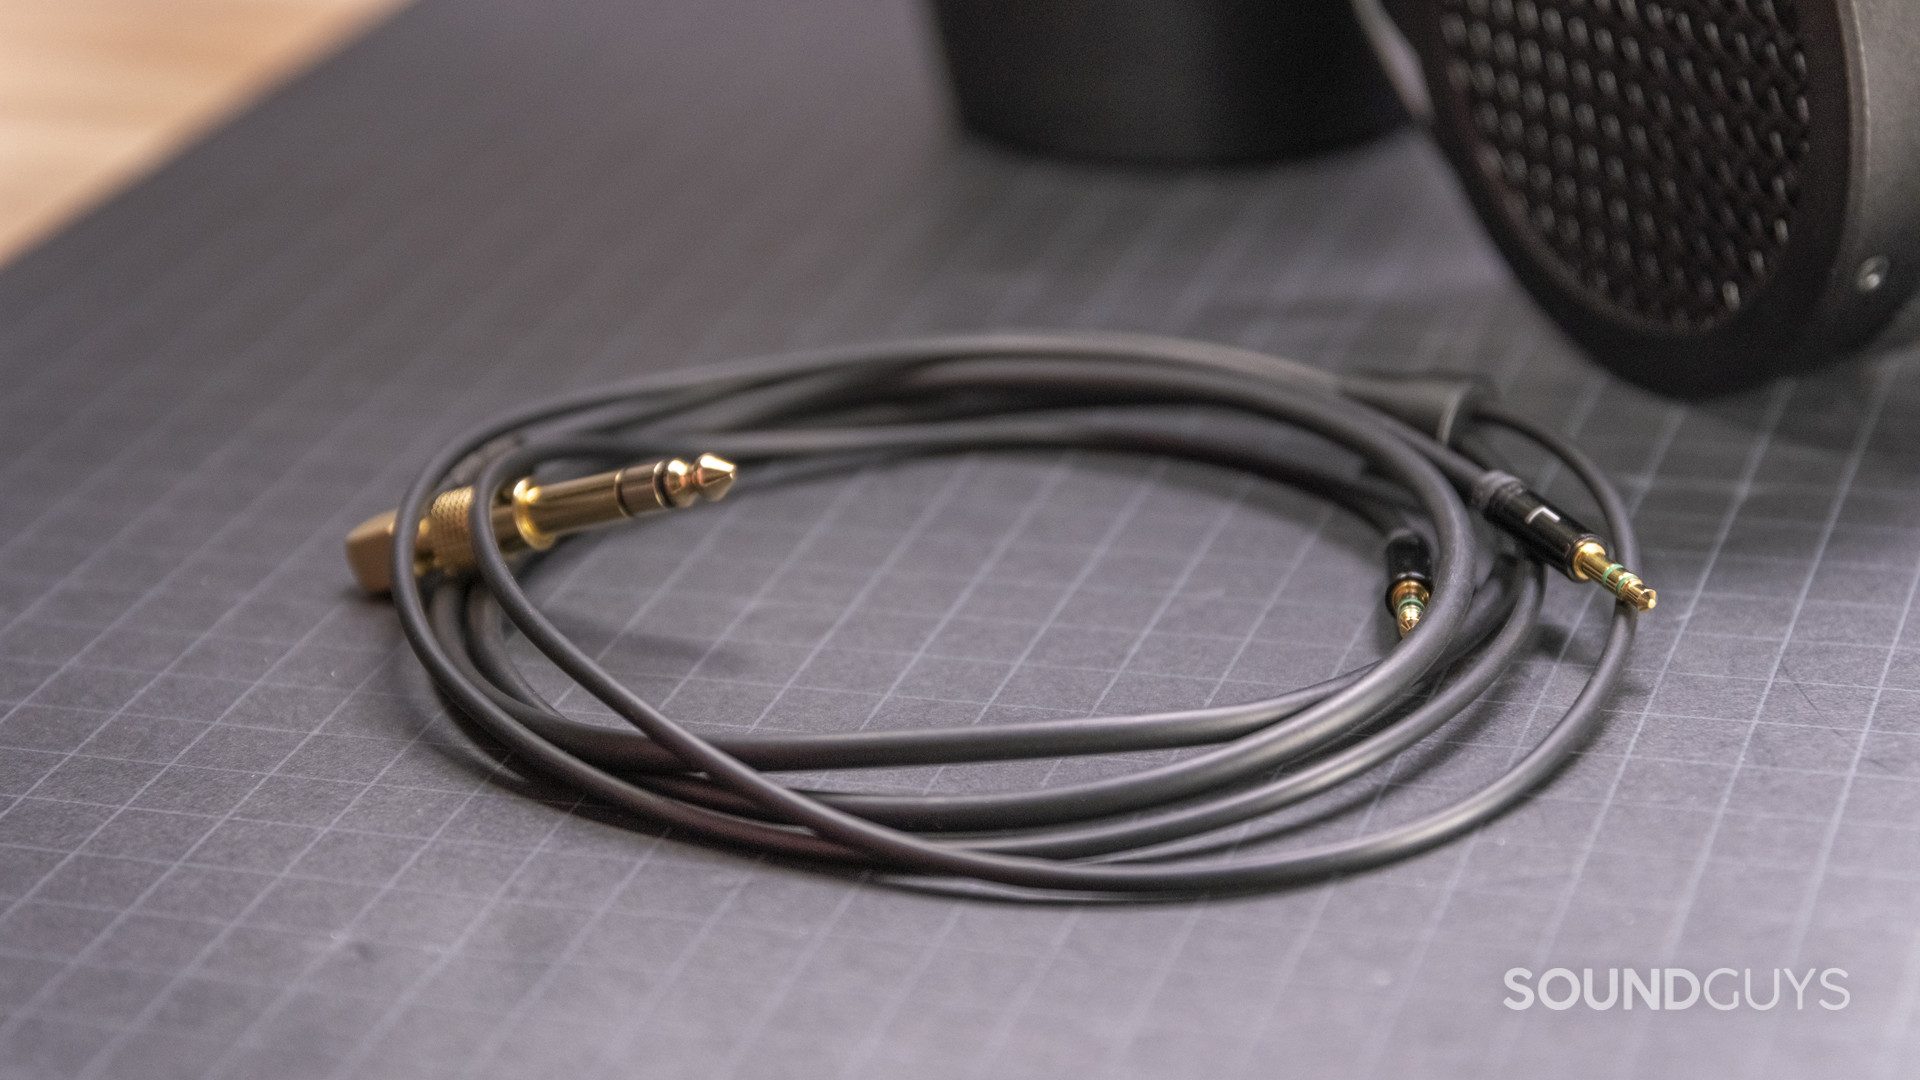 The cable that comes with the HiFiMan Sundara rests on a gridded surface.